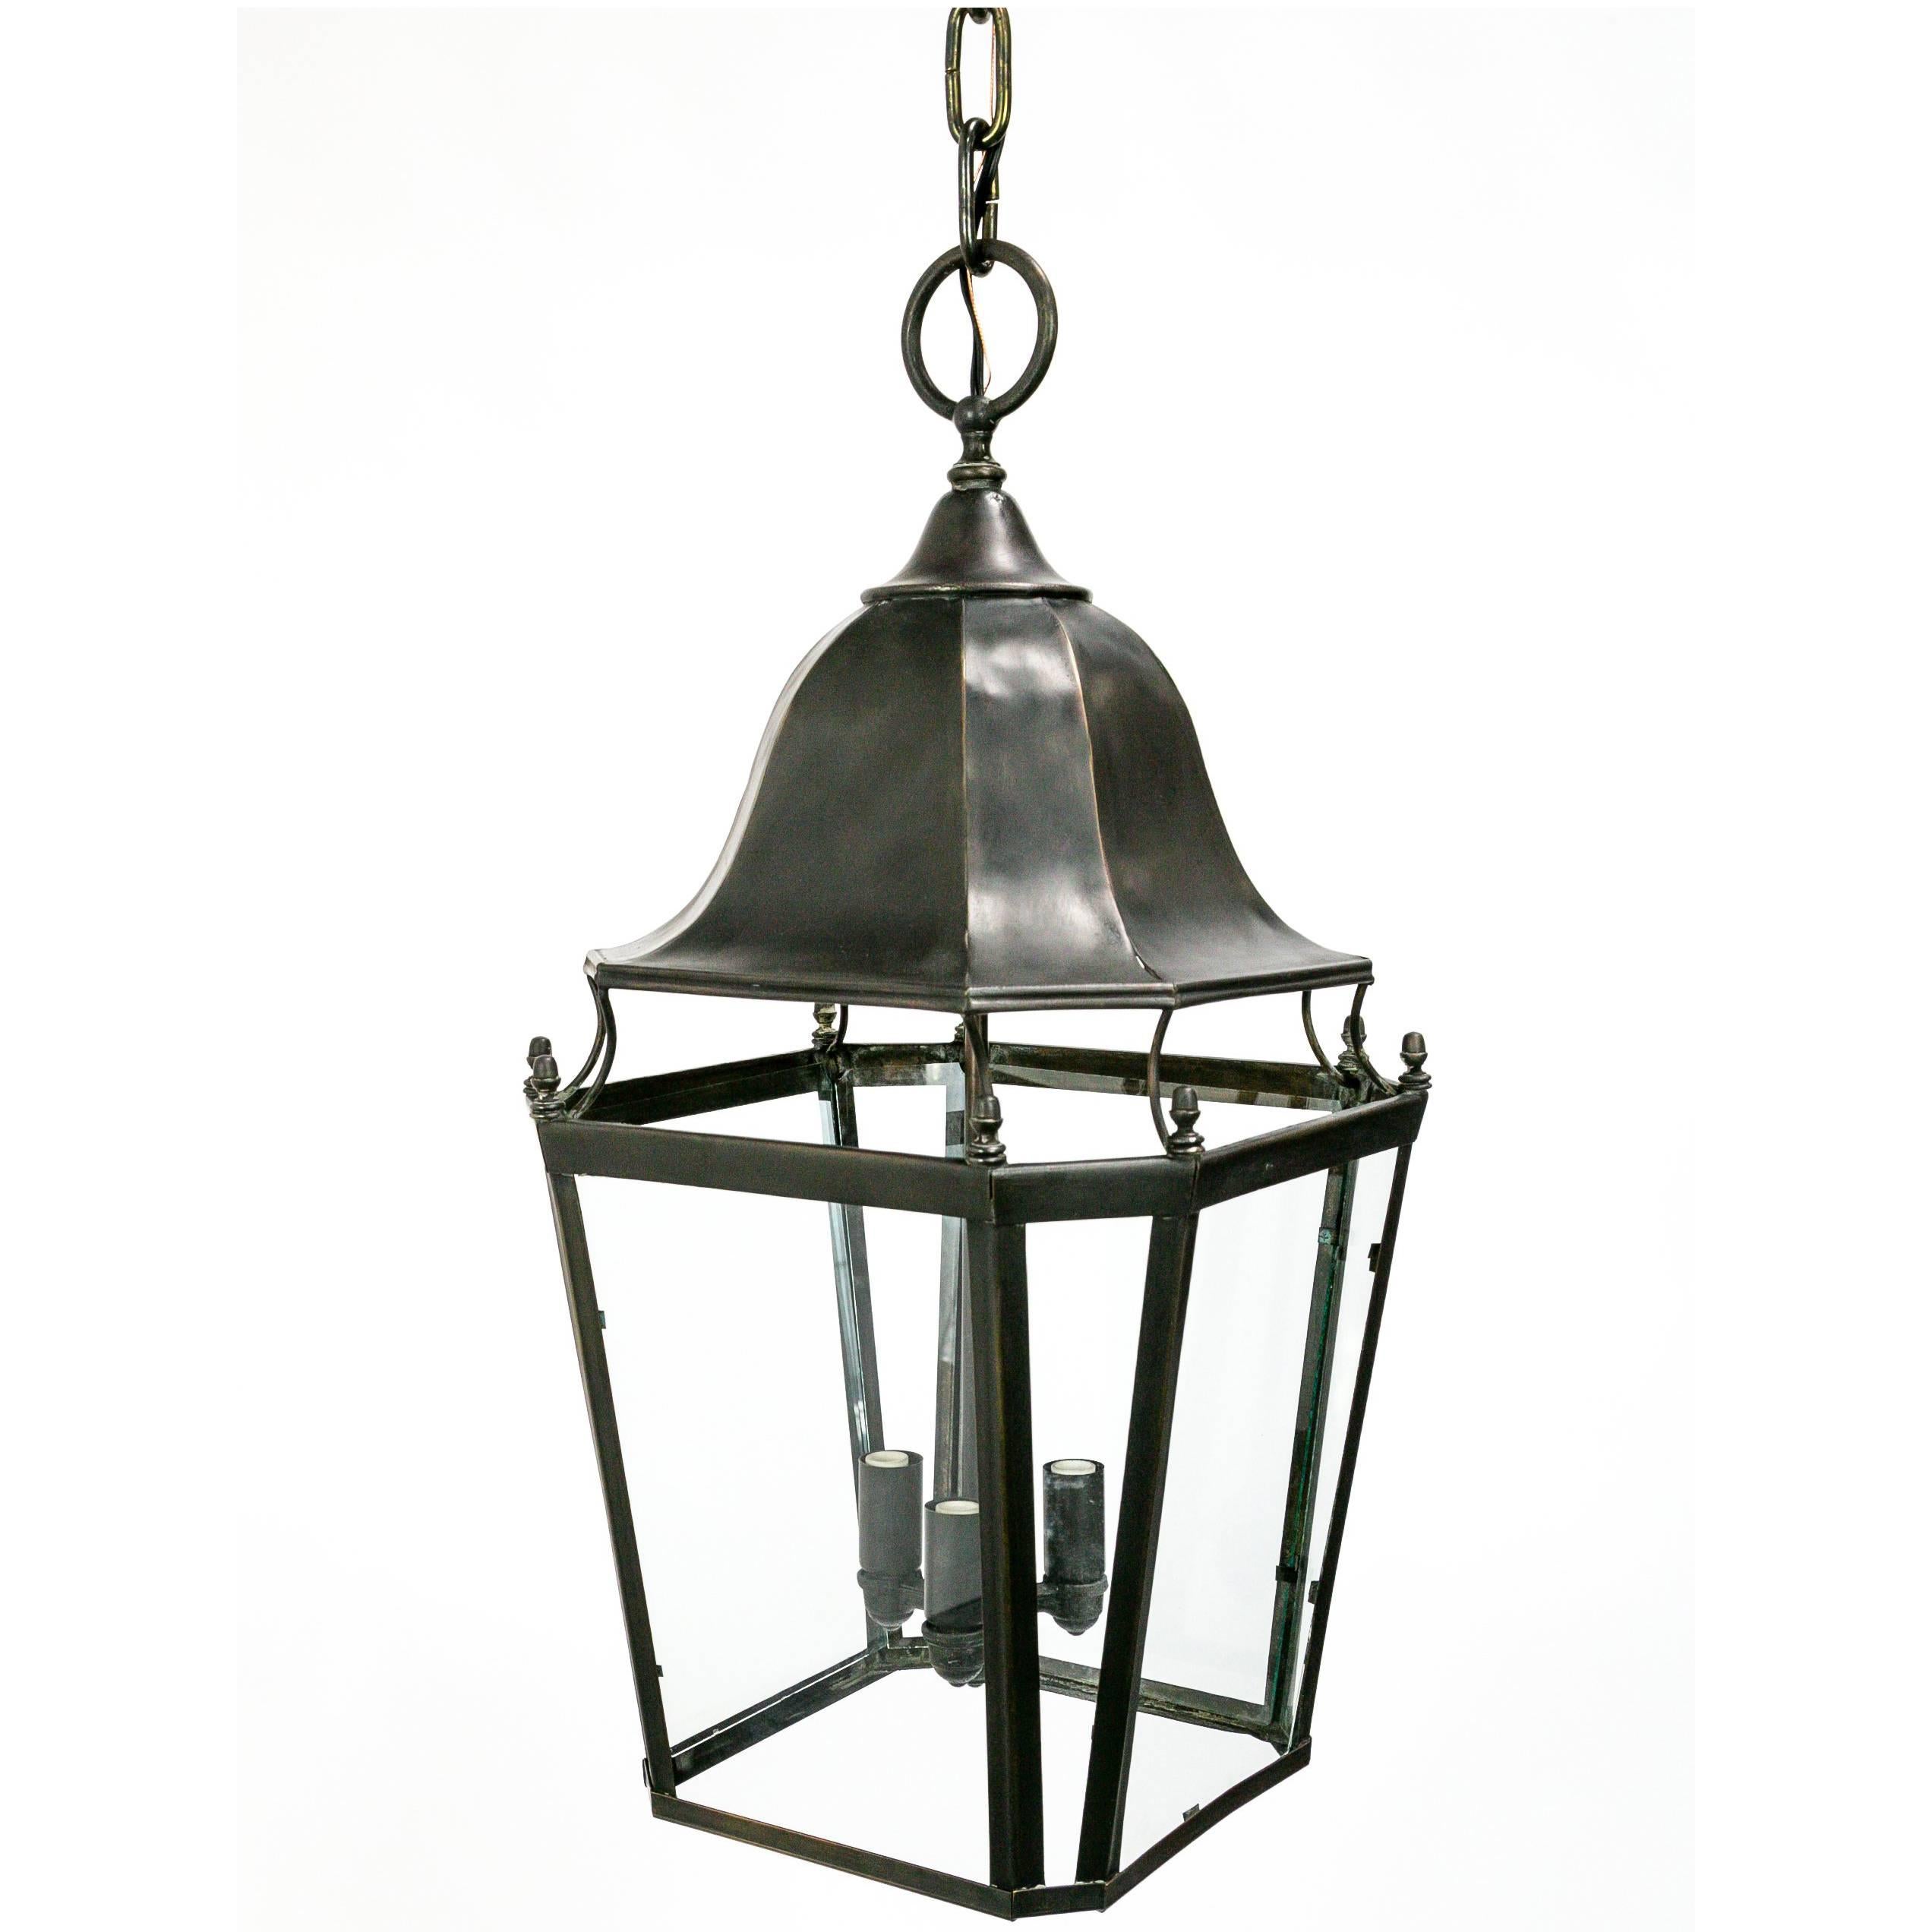 Colonial Style Eight-Sided Lantern